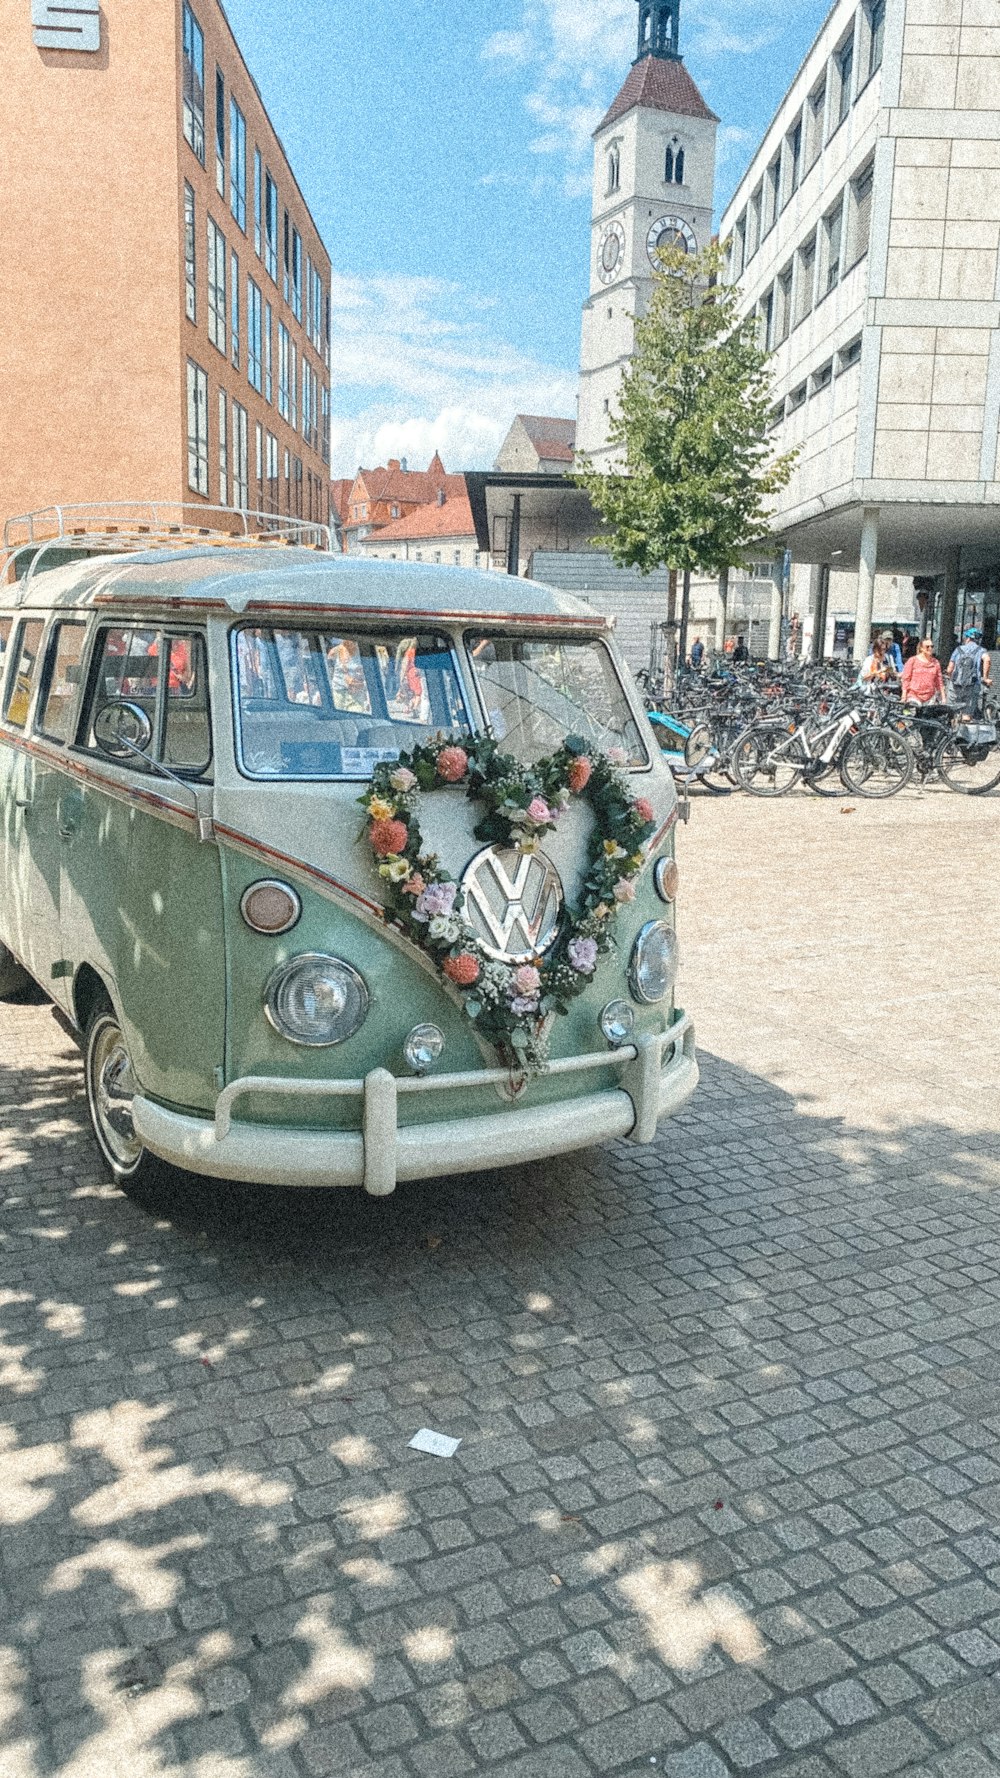 a van with decorations on it